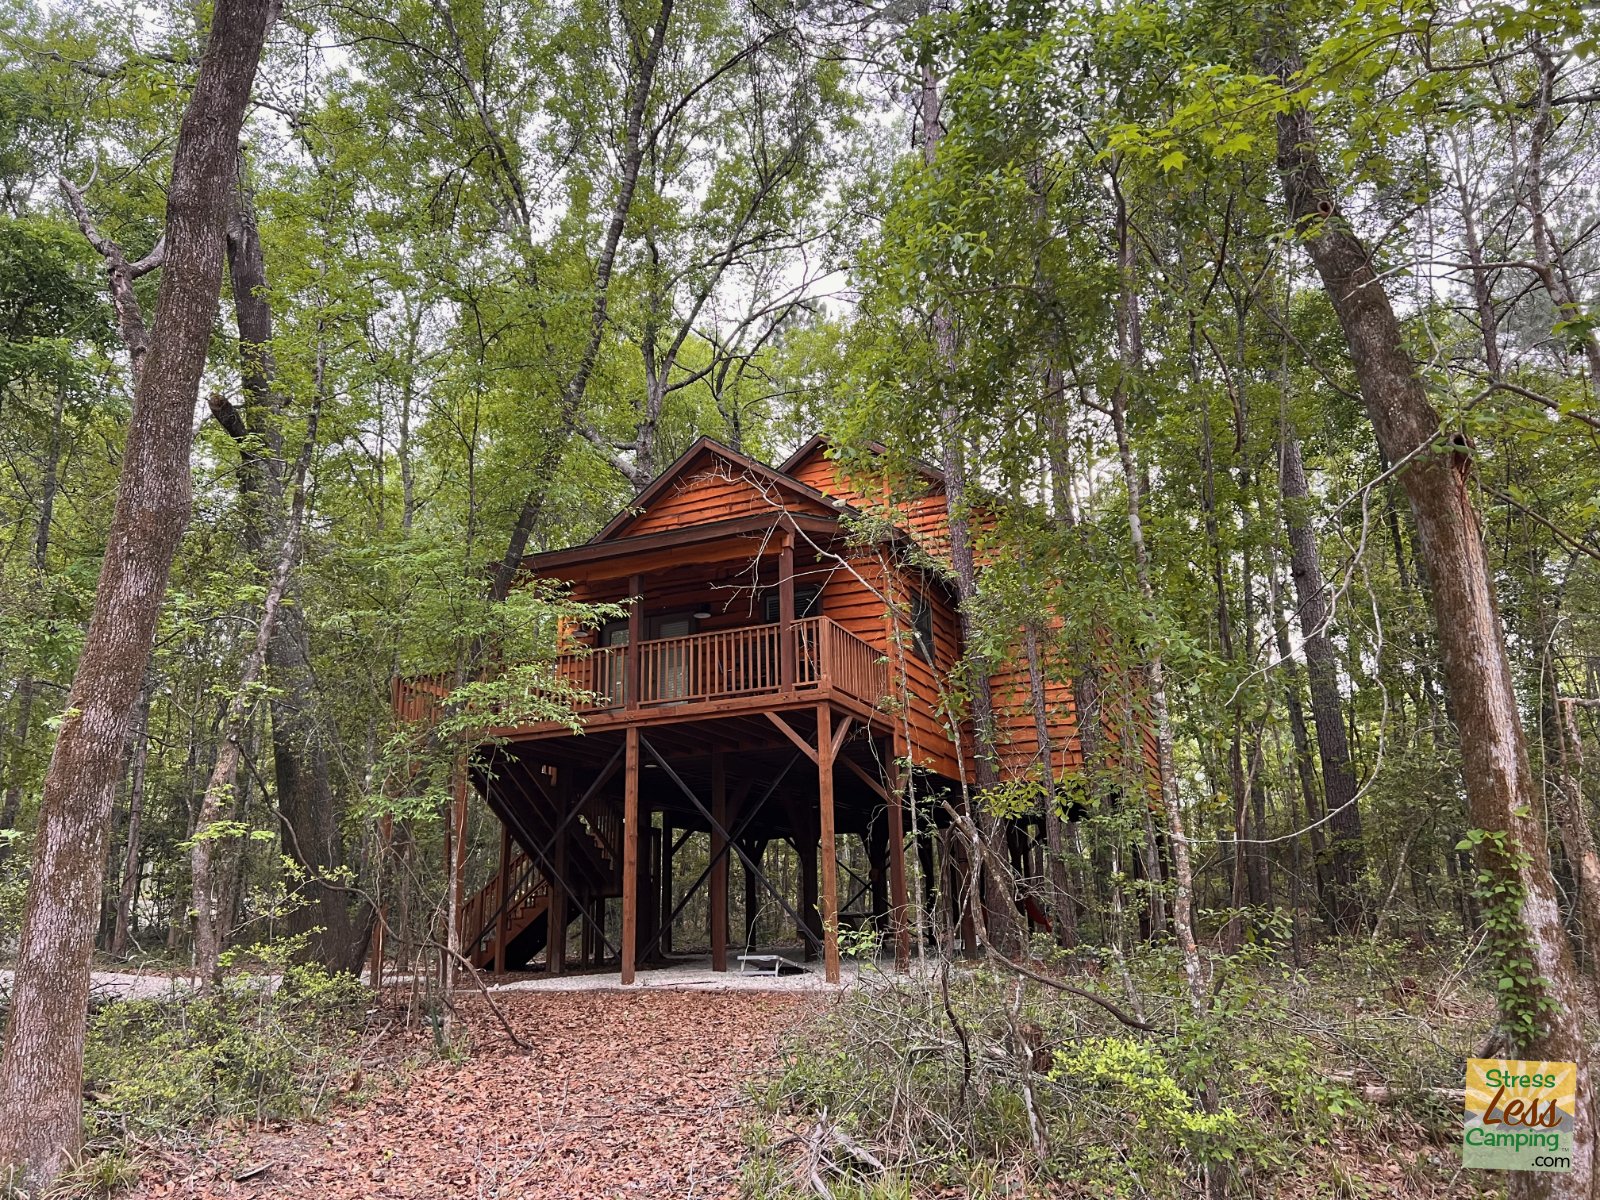 The tree house cabin at Two Creeks Crossing with several bedrooms along with a place for hammocks and games underneath the building in the forest.jpg